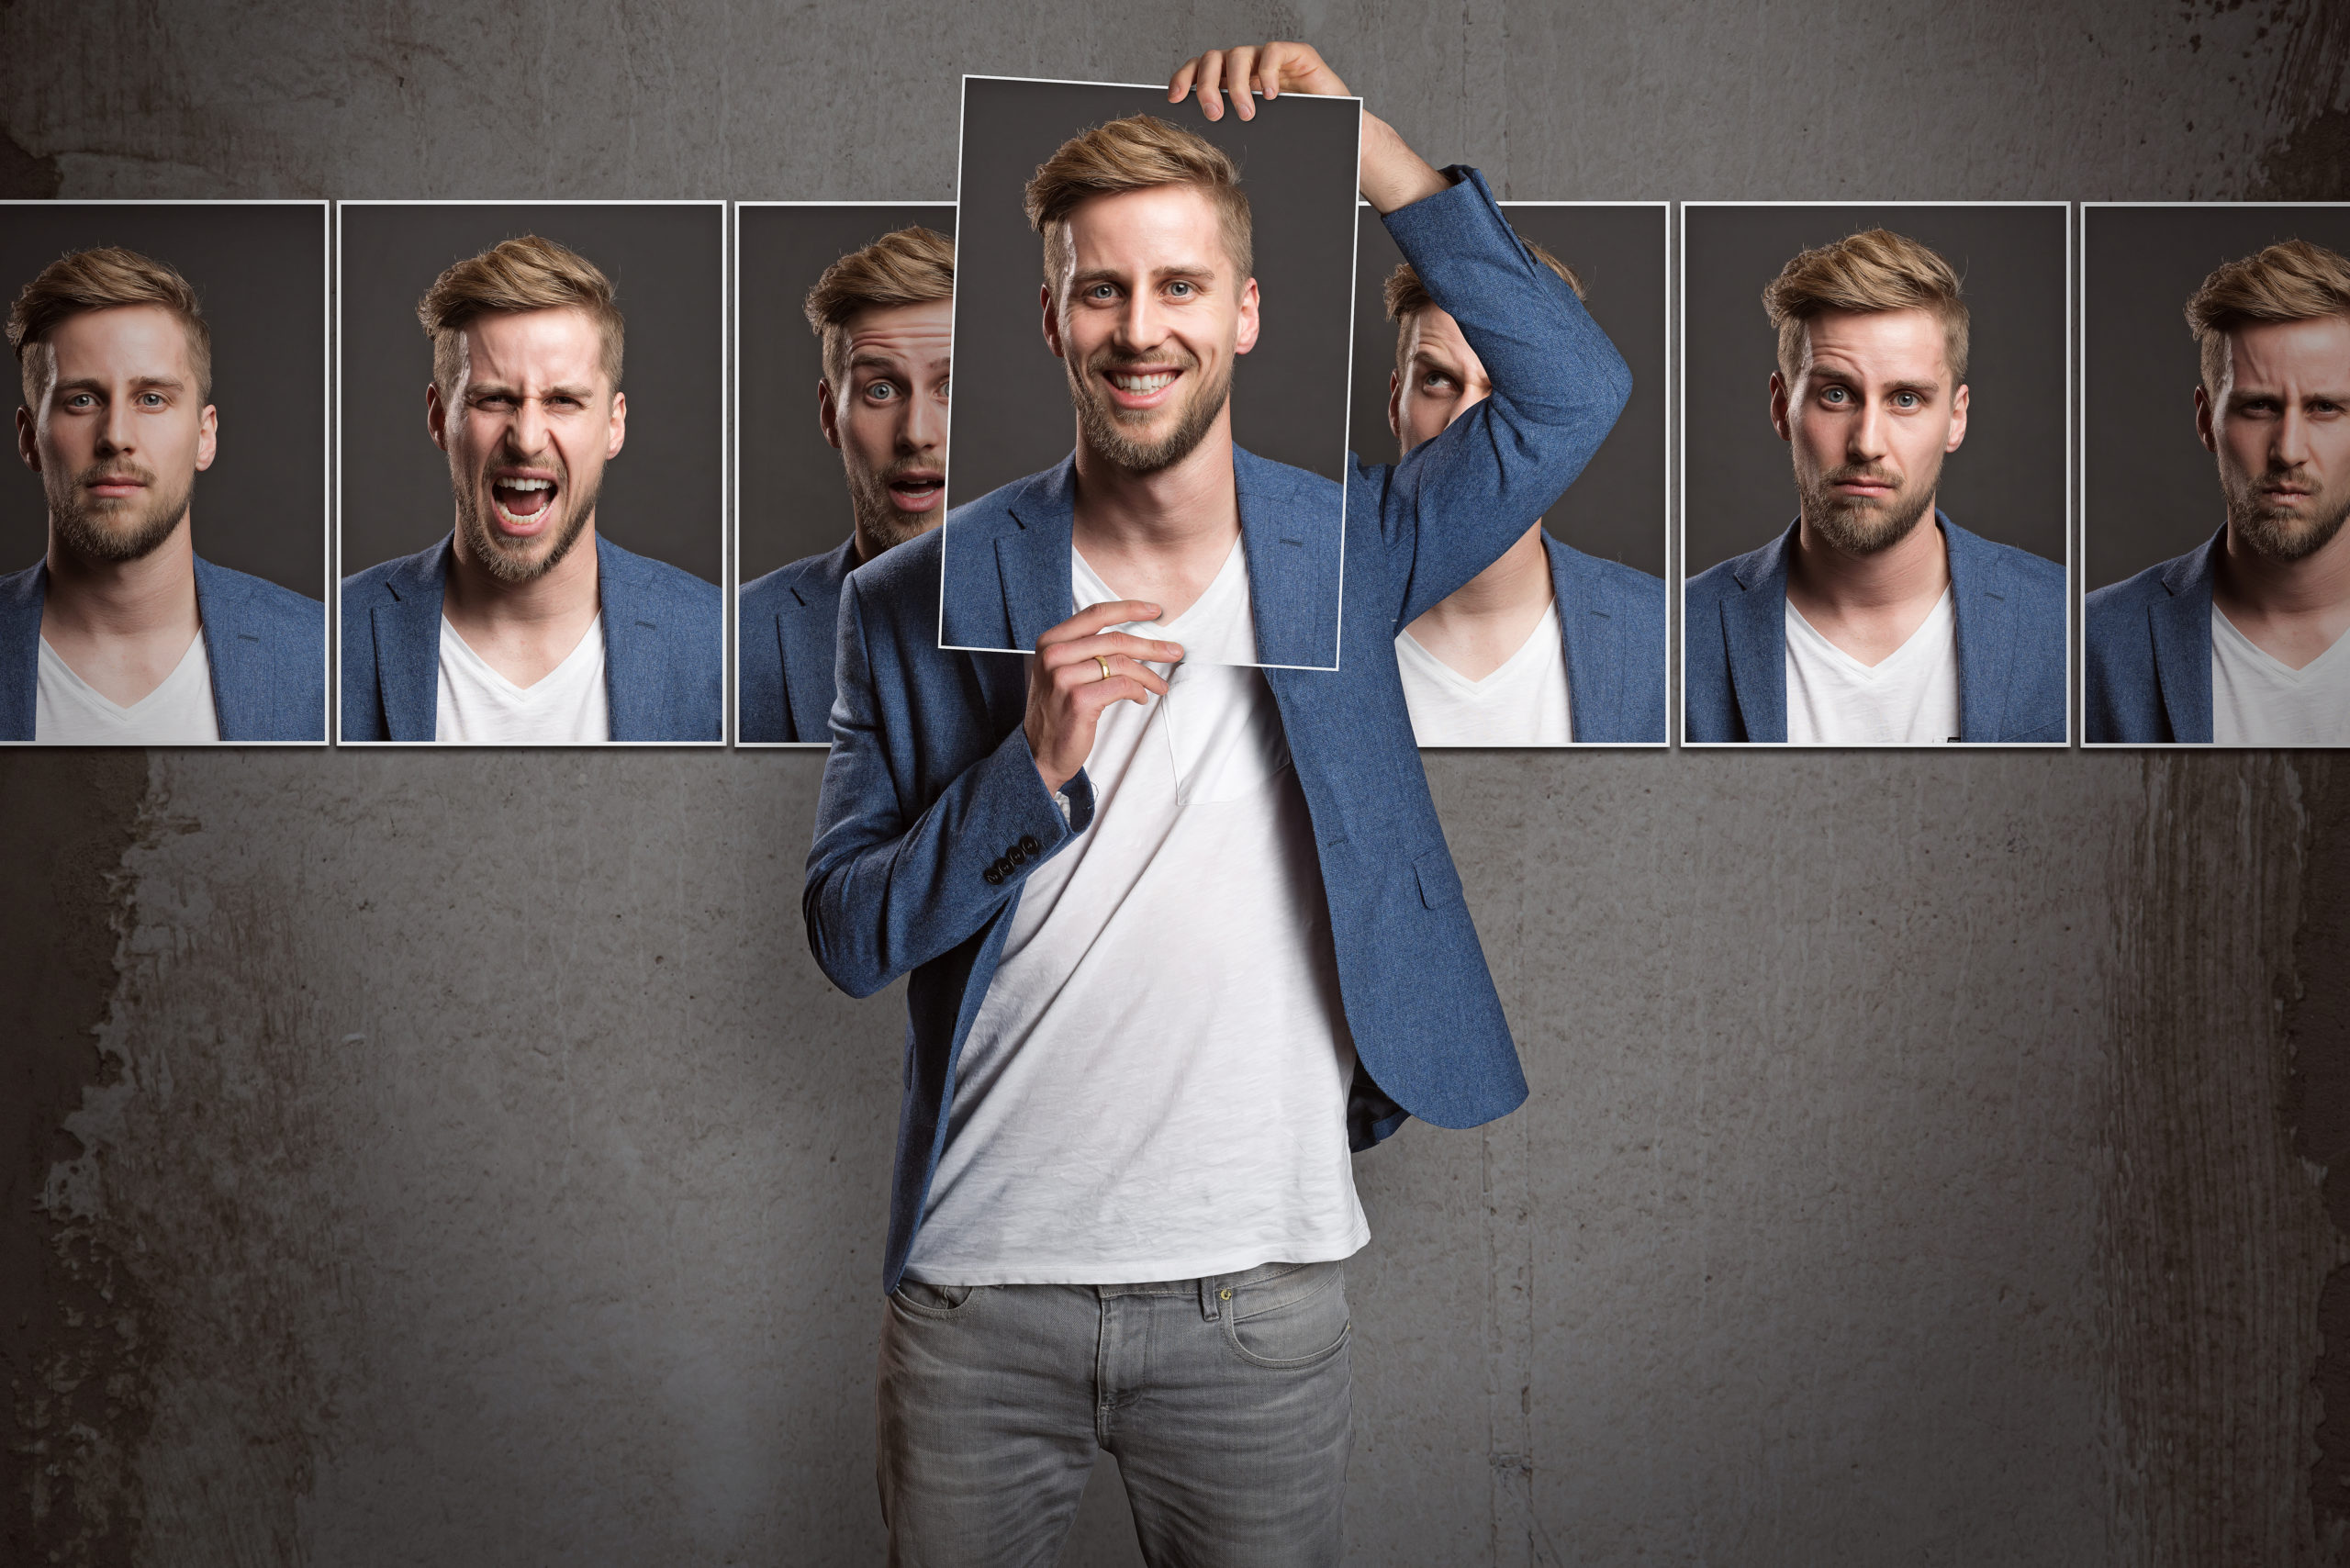 Tired of being who you are?  The expert says if your personality can be changed